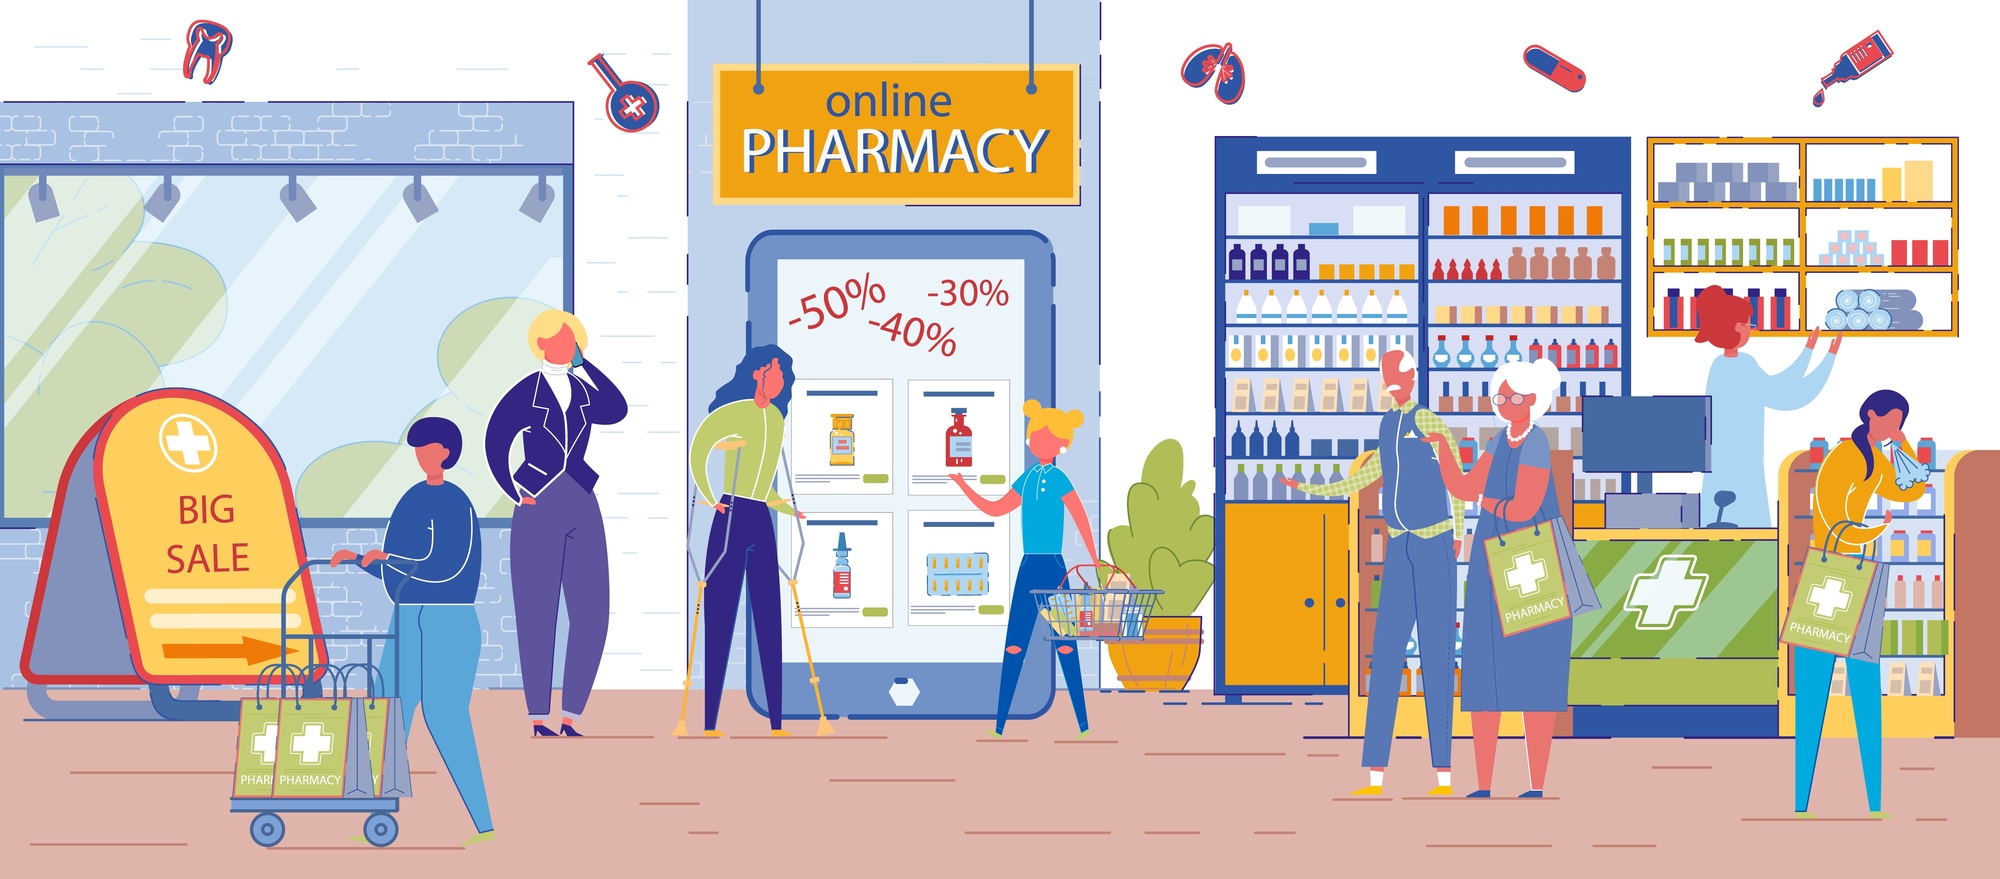 Big Discount in Online Pharmacy Gained Popularity.